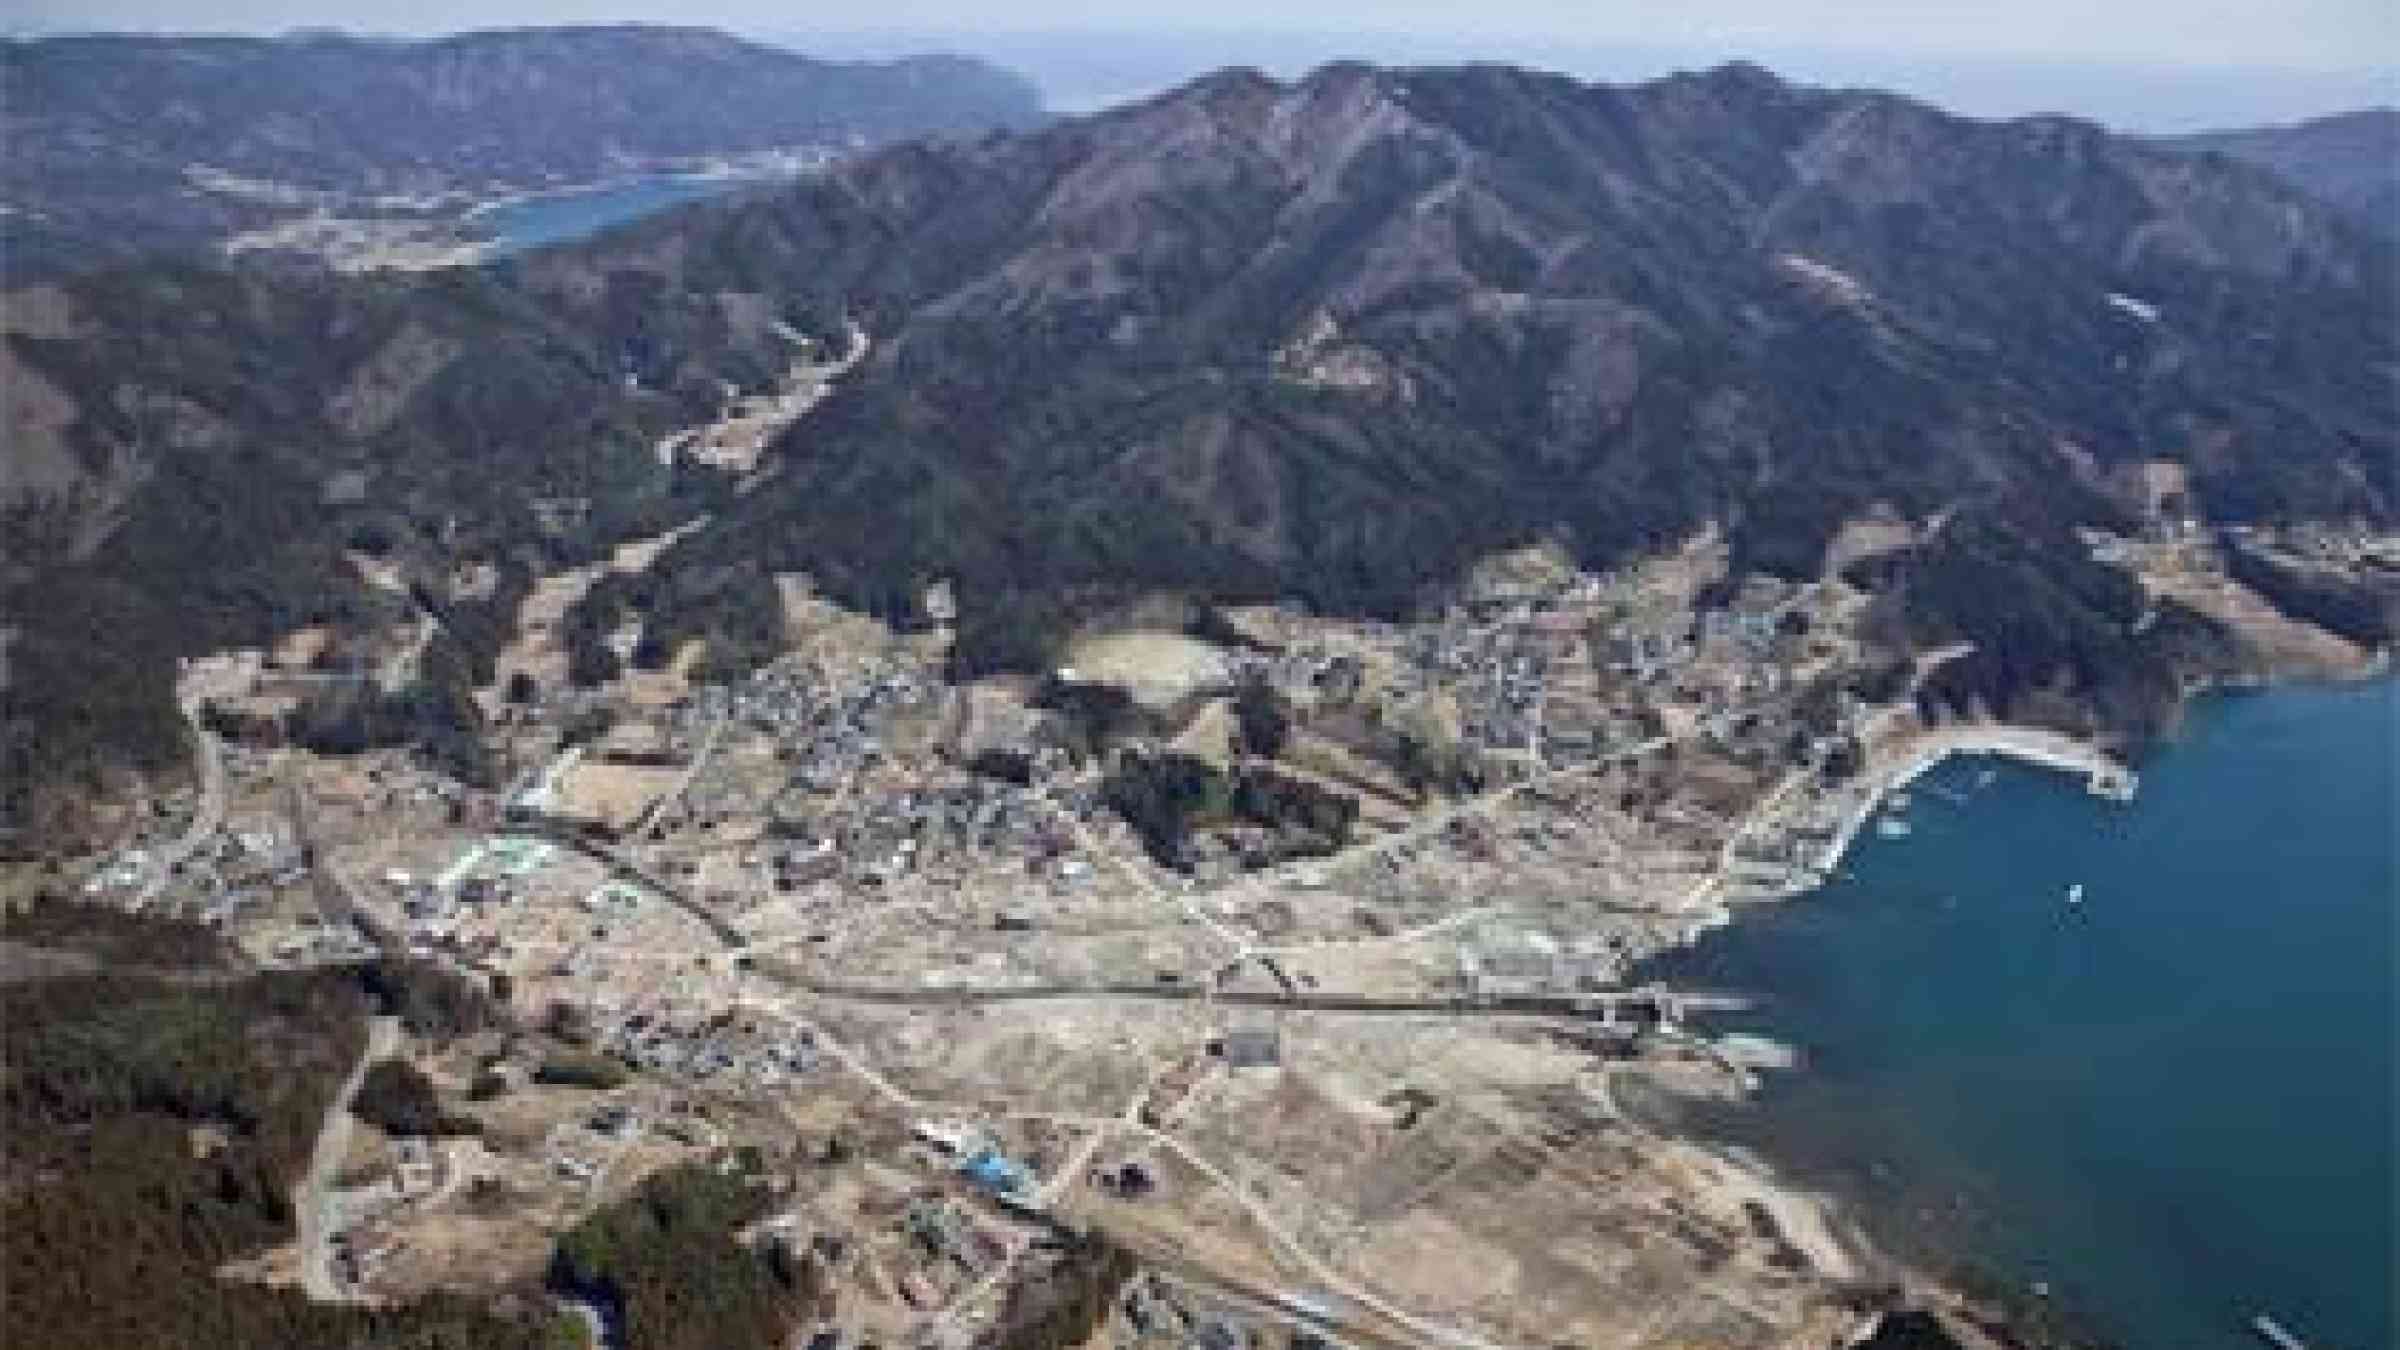 Aerial photograph from Kokusai Kogyo Group of one of the damaged cities from the Great Eastern Japan Earthquake and Tsunami